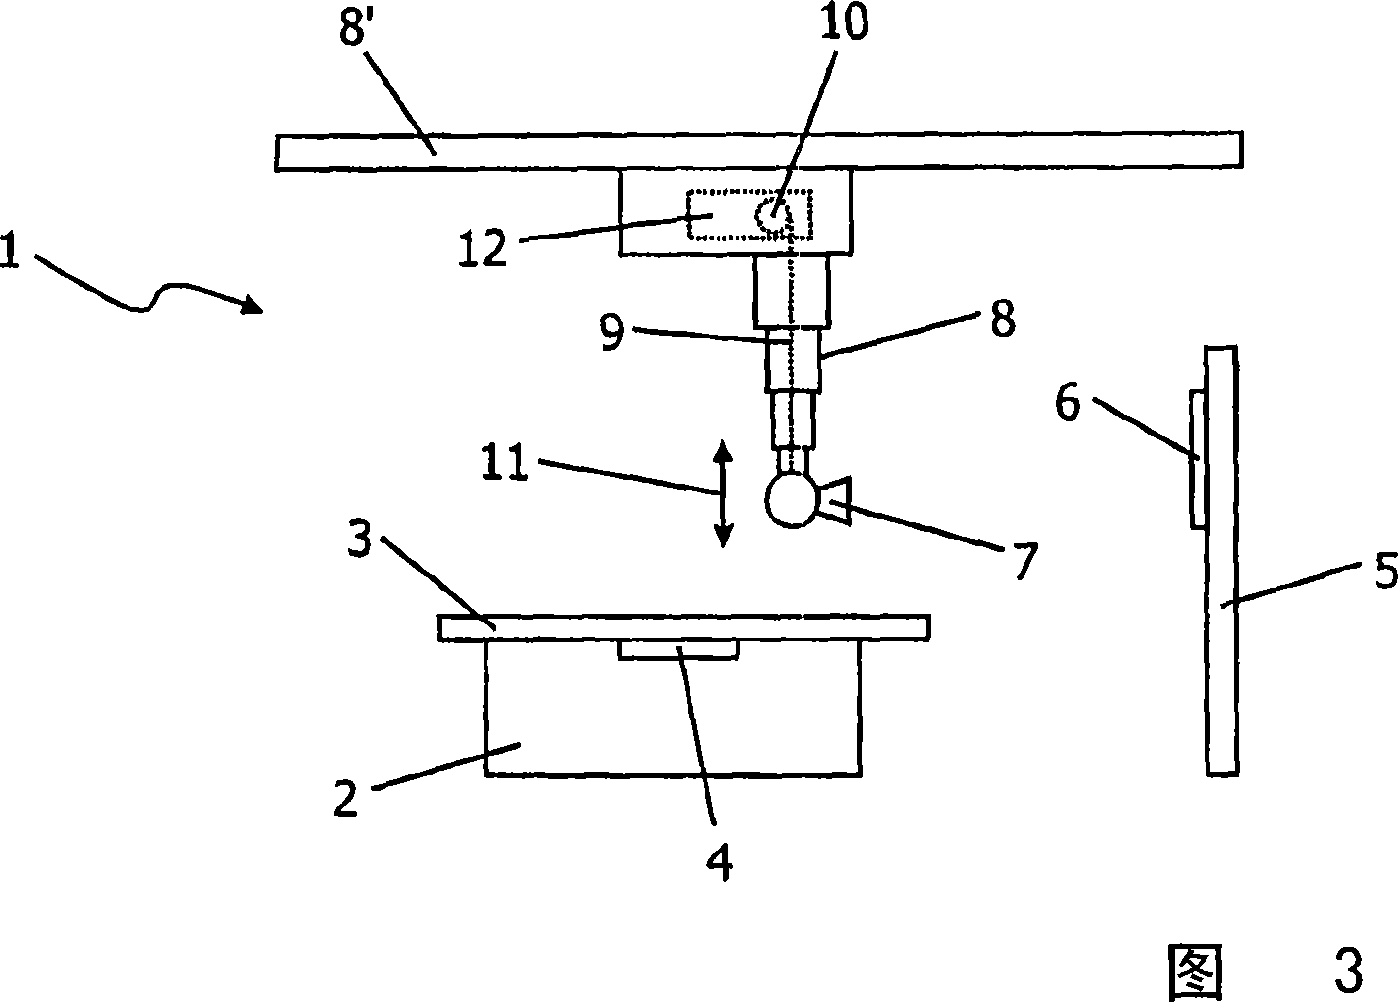 Drive unit for X-ray system